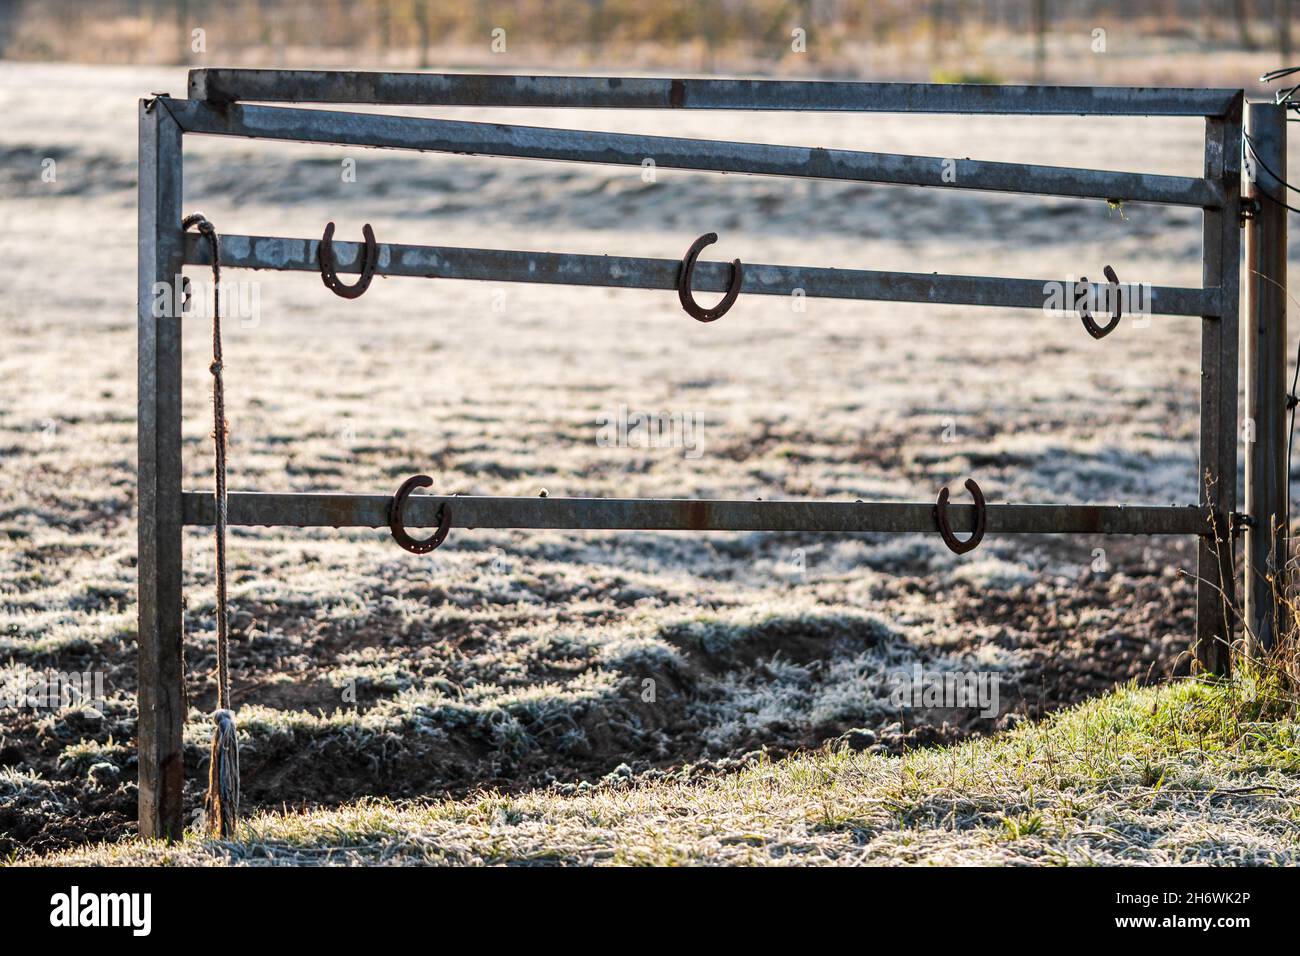 Horseshoes hanging on a metal pasture gate on a sunny winter morning. Symbol of good luck, lucky charm in equestrian sports and horse husbandry. Stock Photo